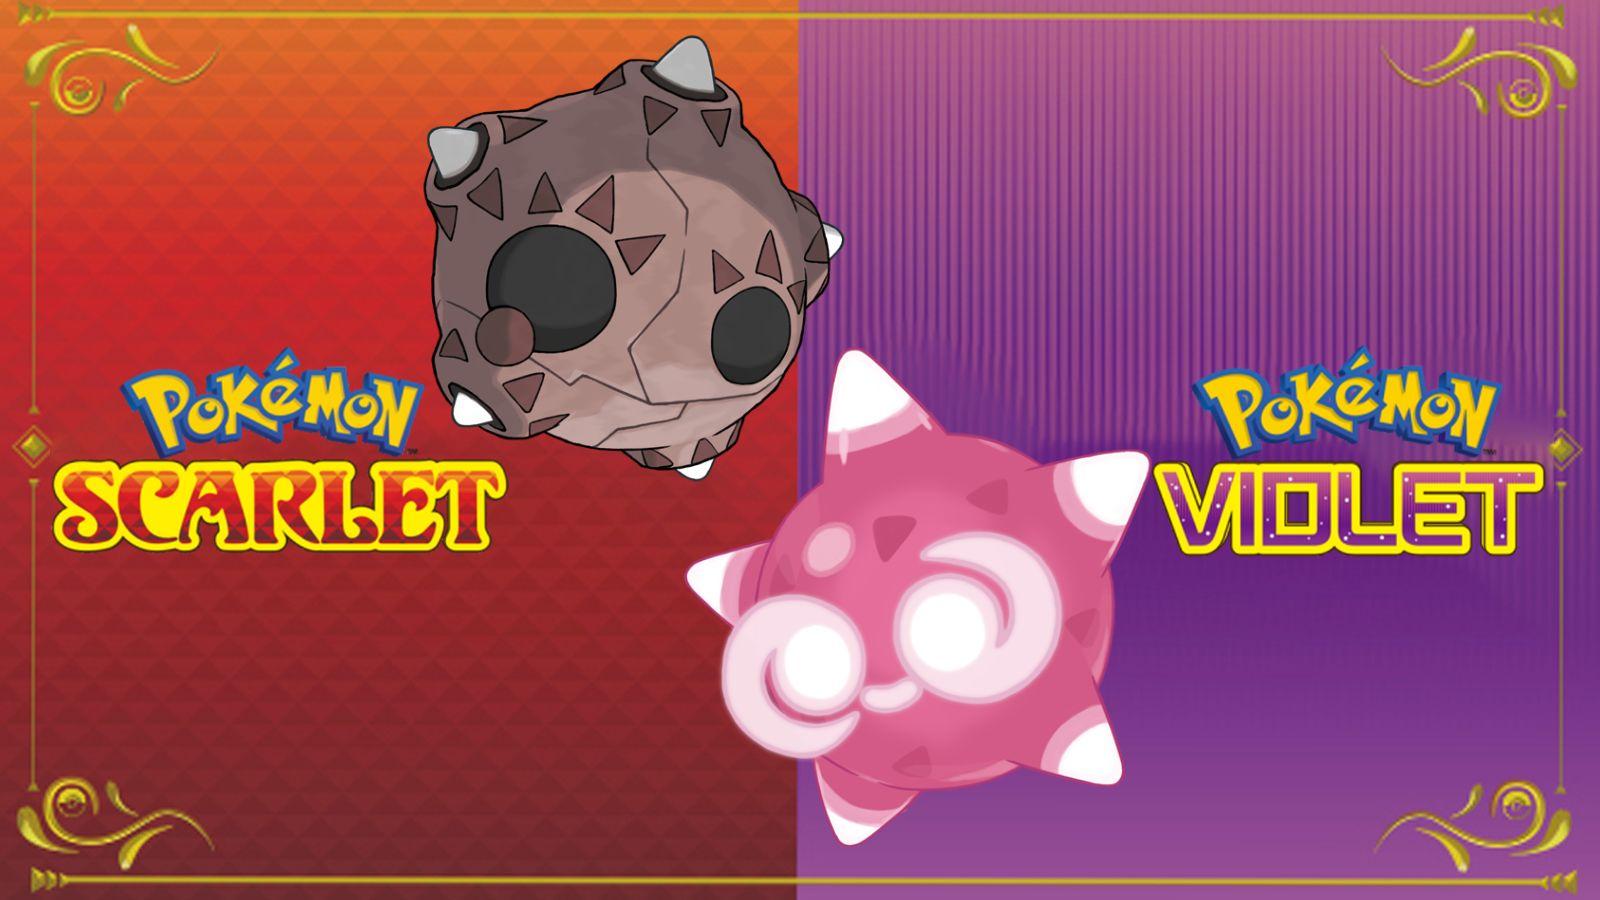 Pokemon Scarlet & Violet may have been teased in plain sight for years -  Dexerto